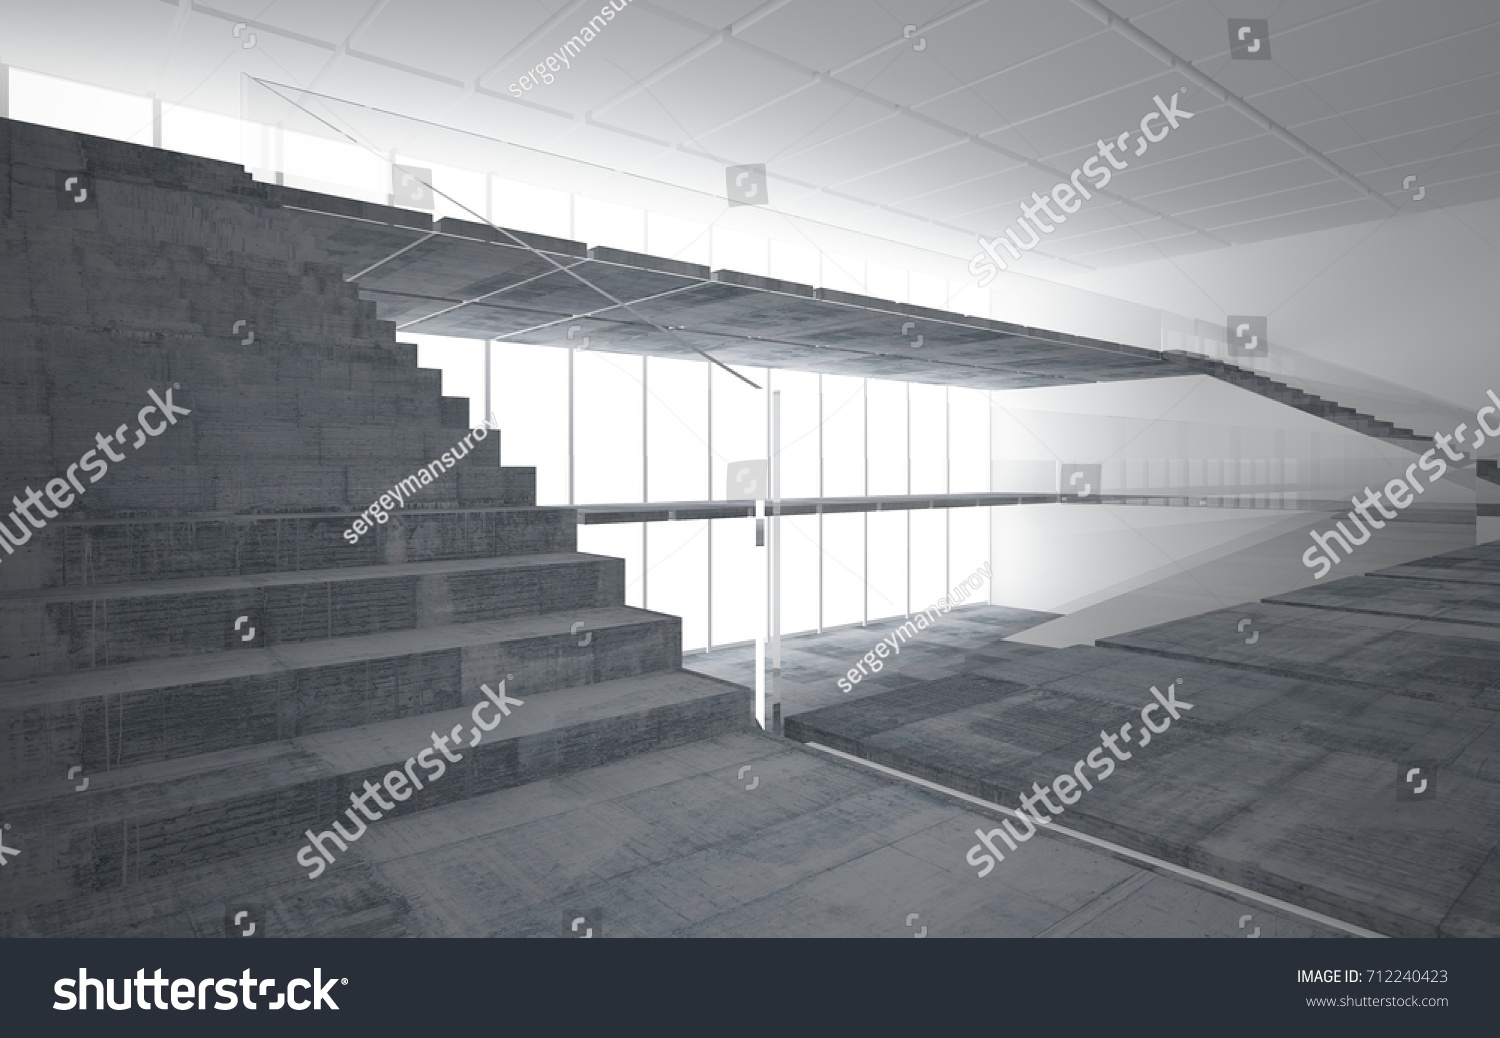 Abstract white and concrete interior multilevel public space with window. 3D illustration and rendering. #712240423